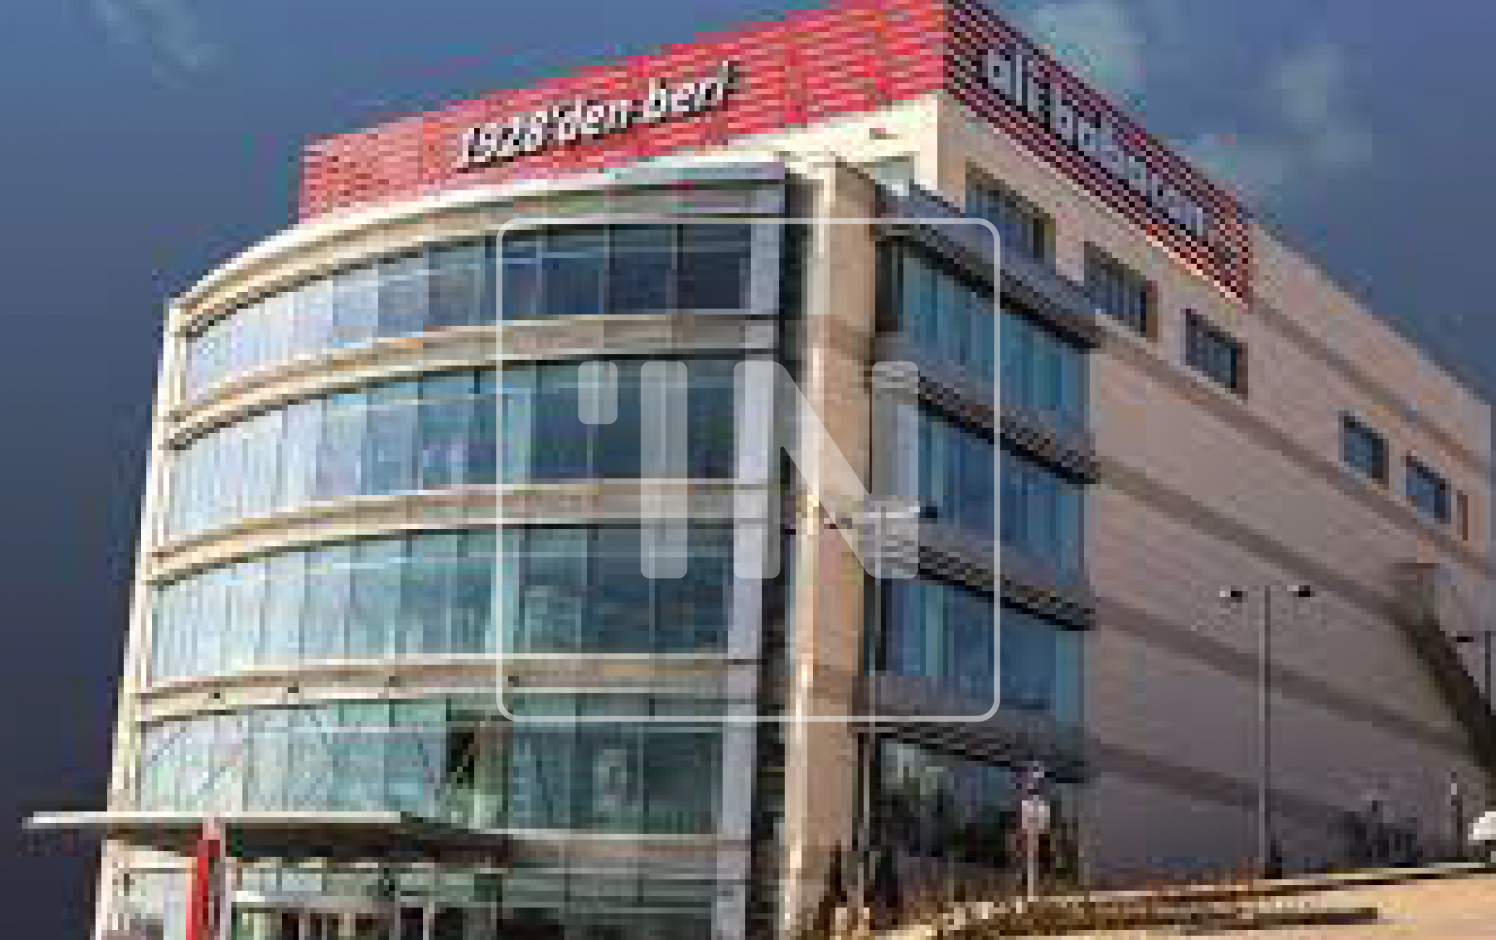 Ali Babacan Business Center